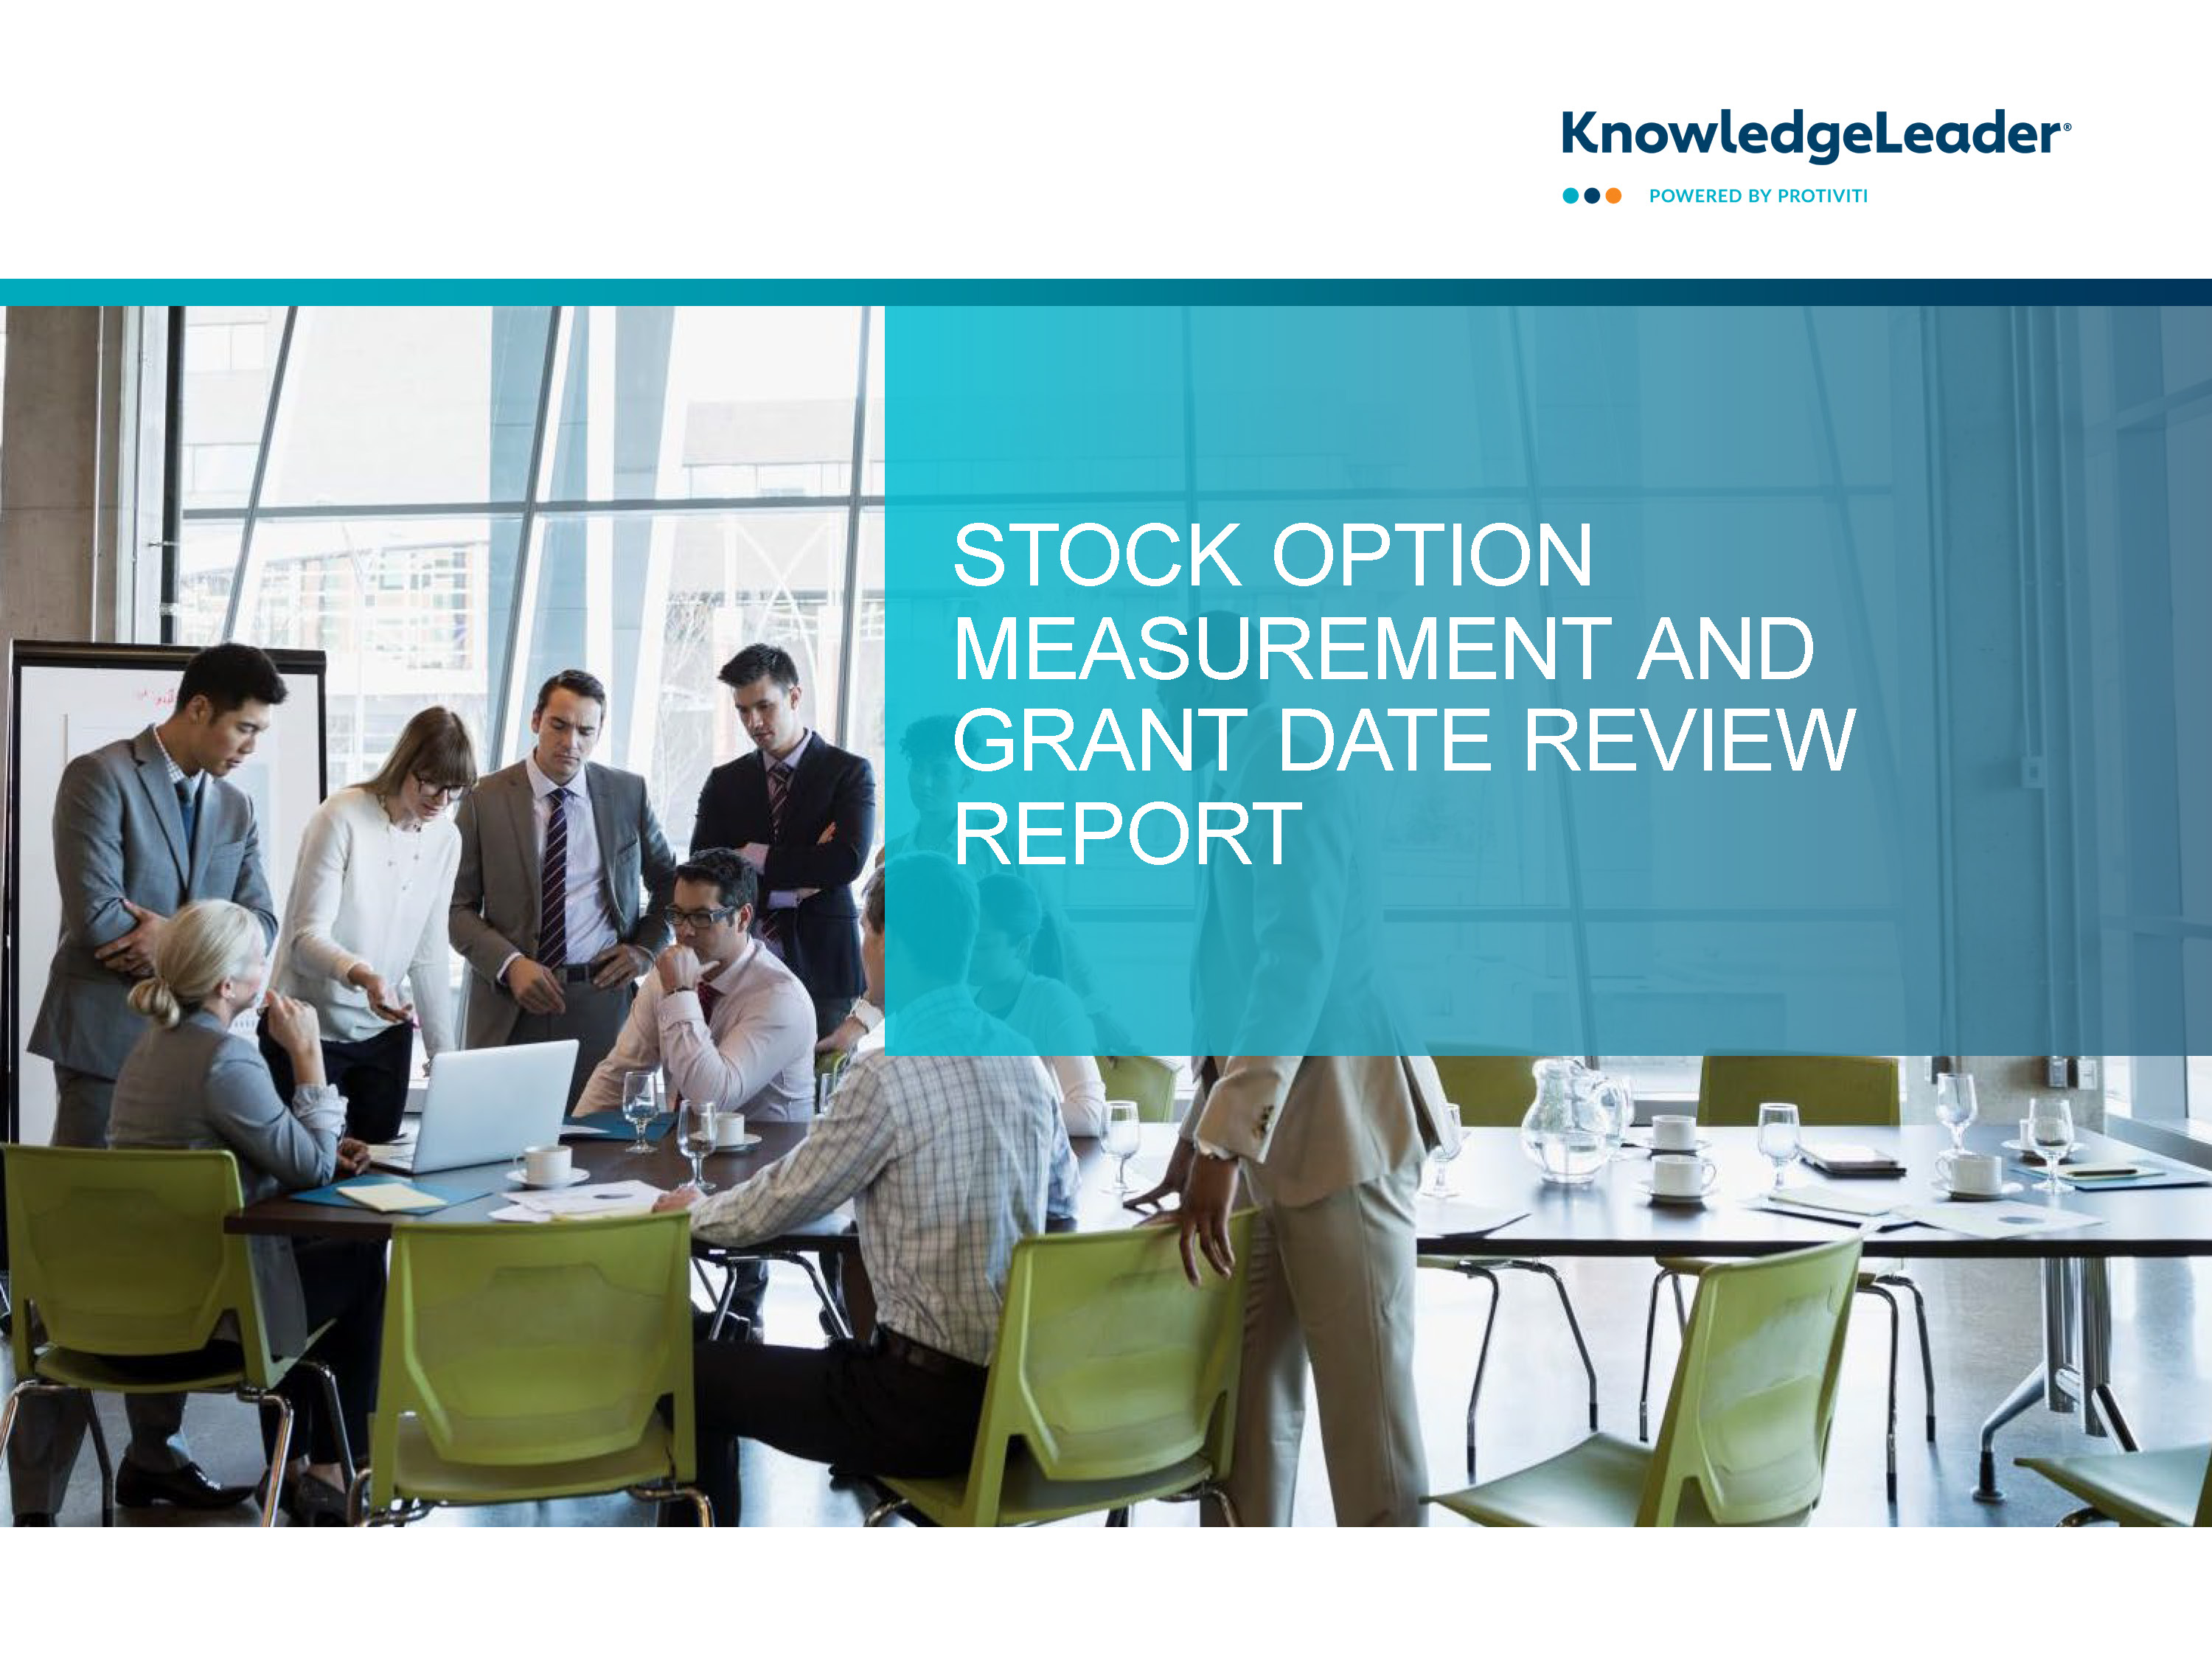 Screenshot of the first page of Stock Option Measurement and Grant Date Review Report